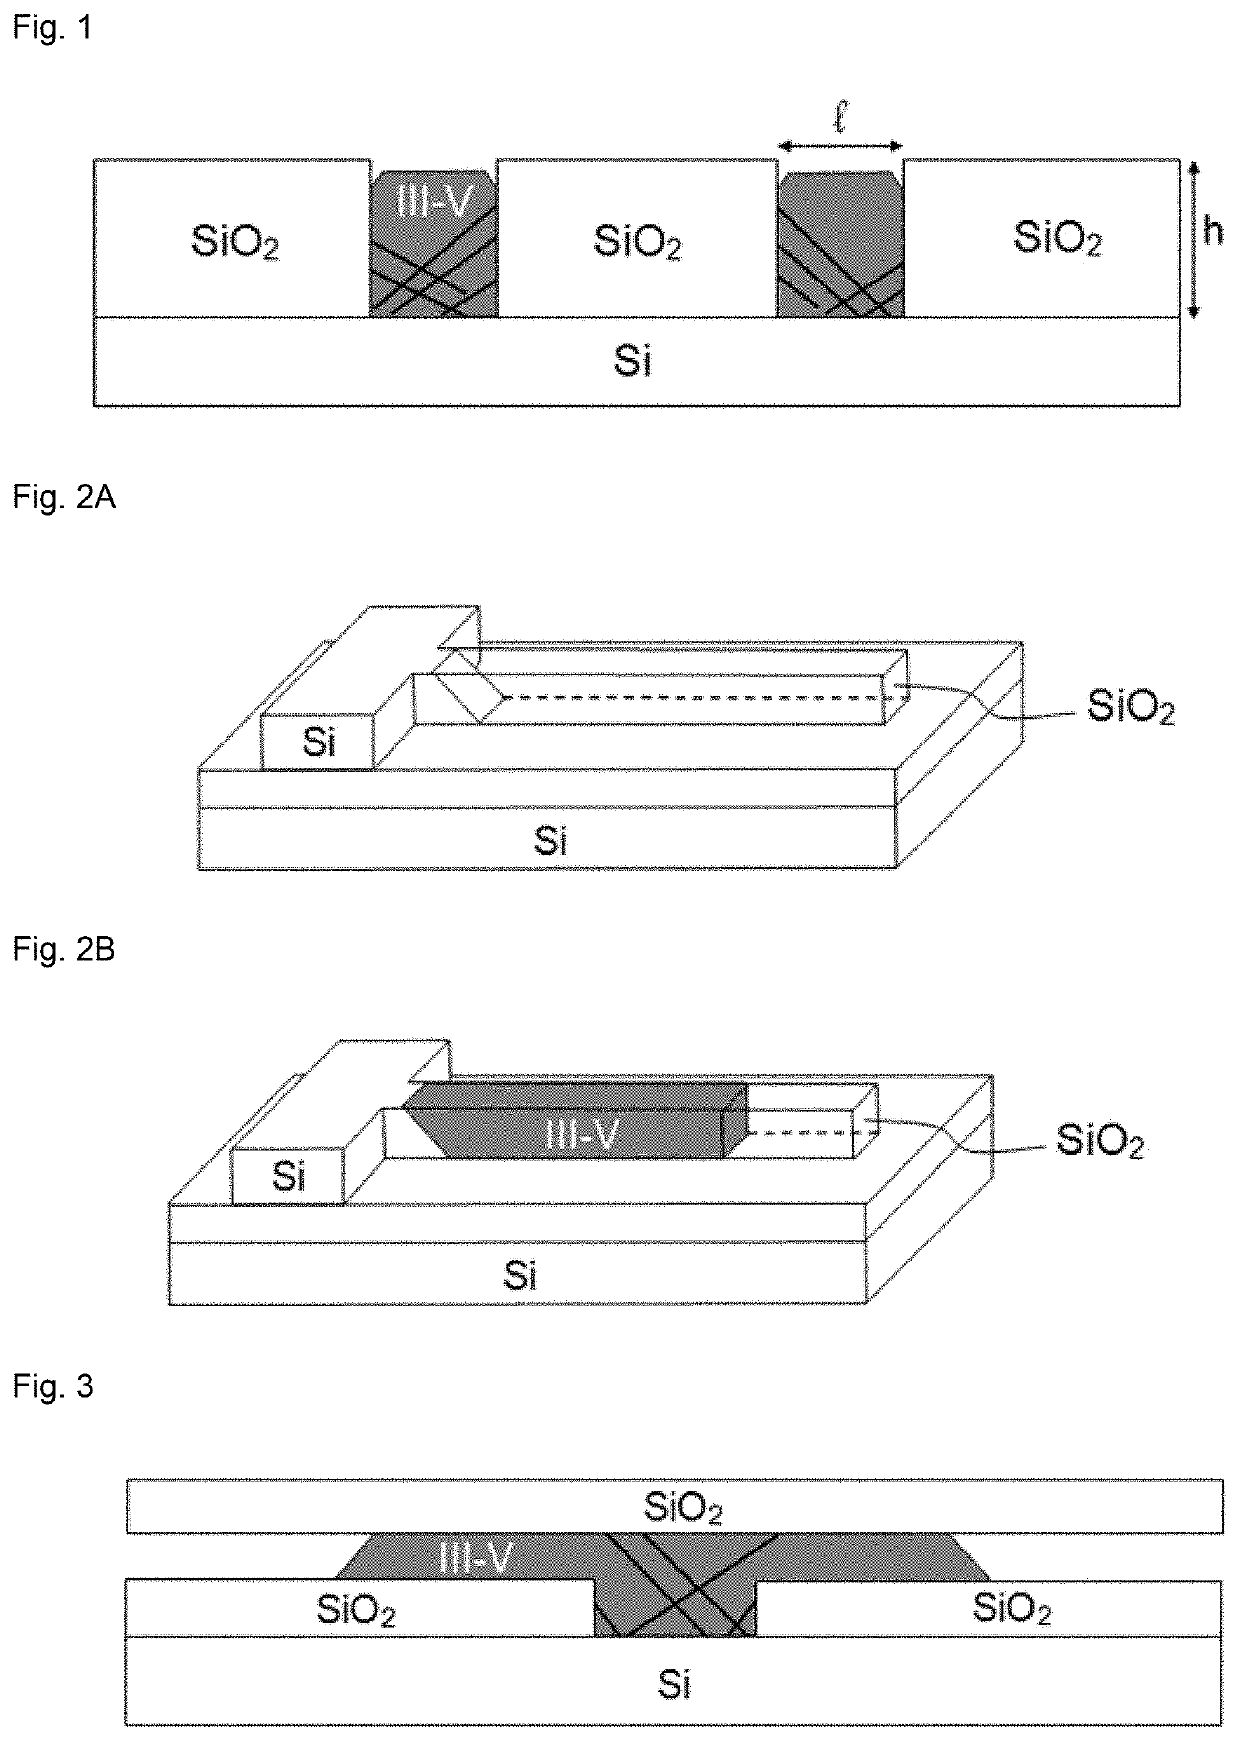 Process for the hetero-integration of a semiconductor material of interest on a silicon substrate